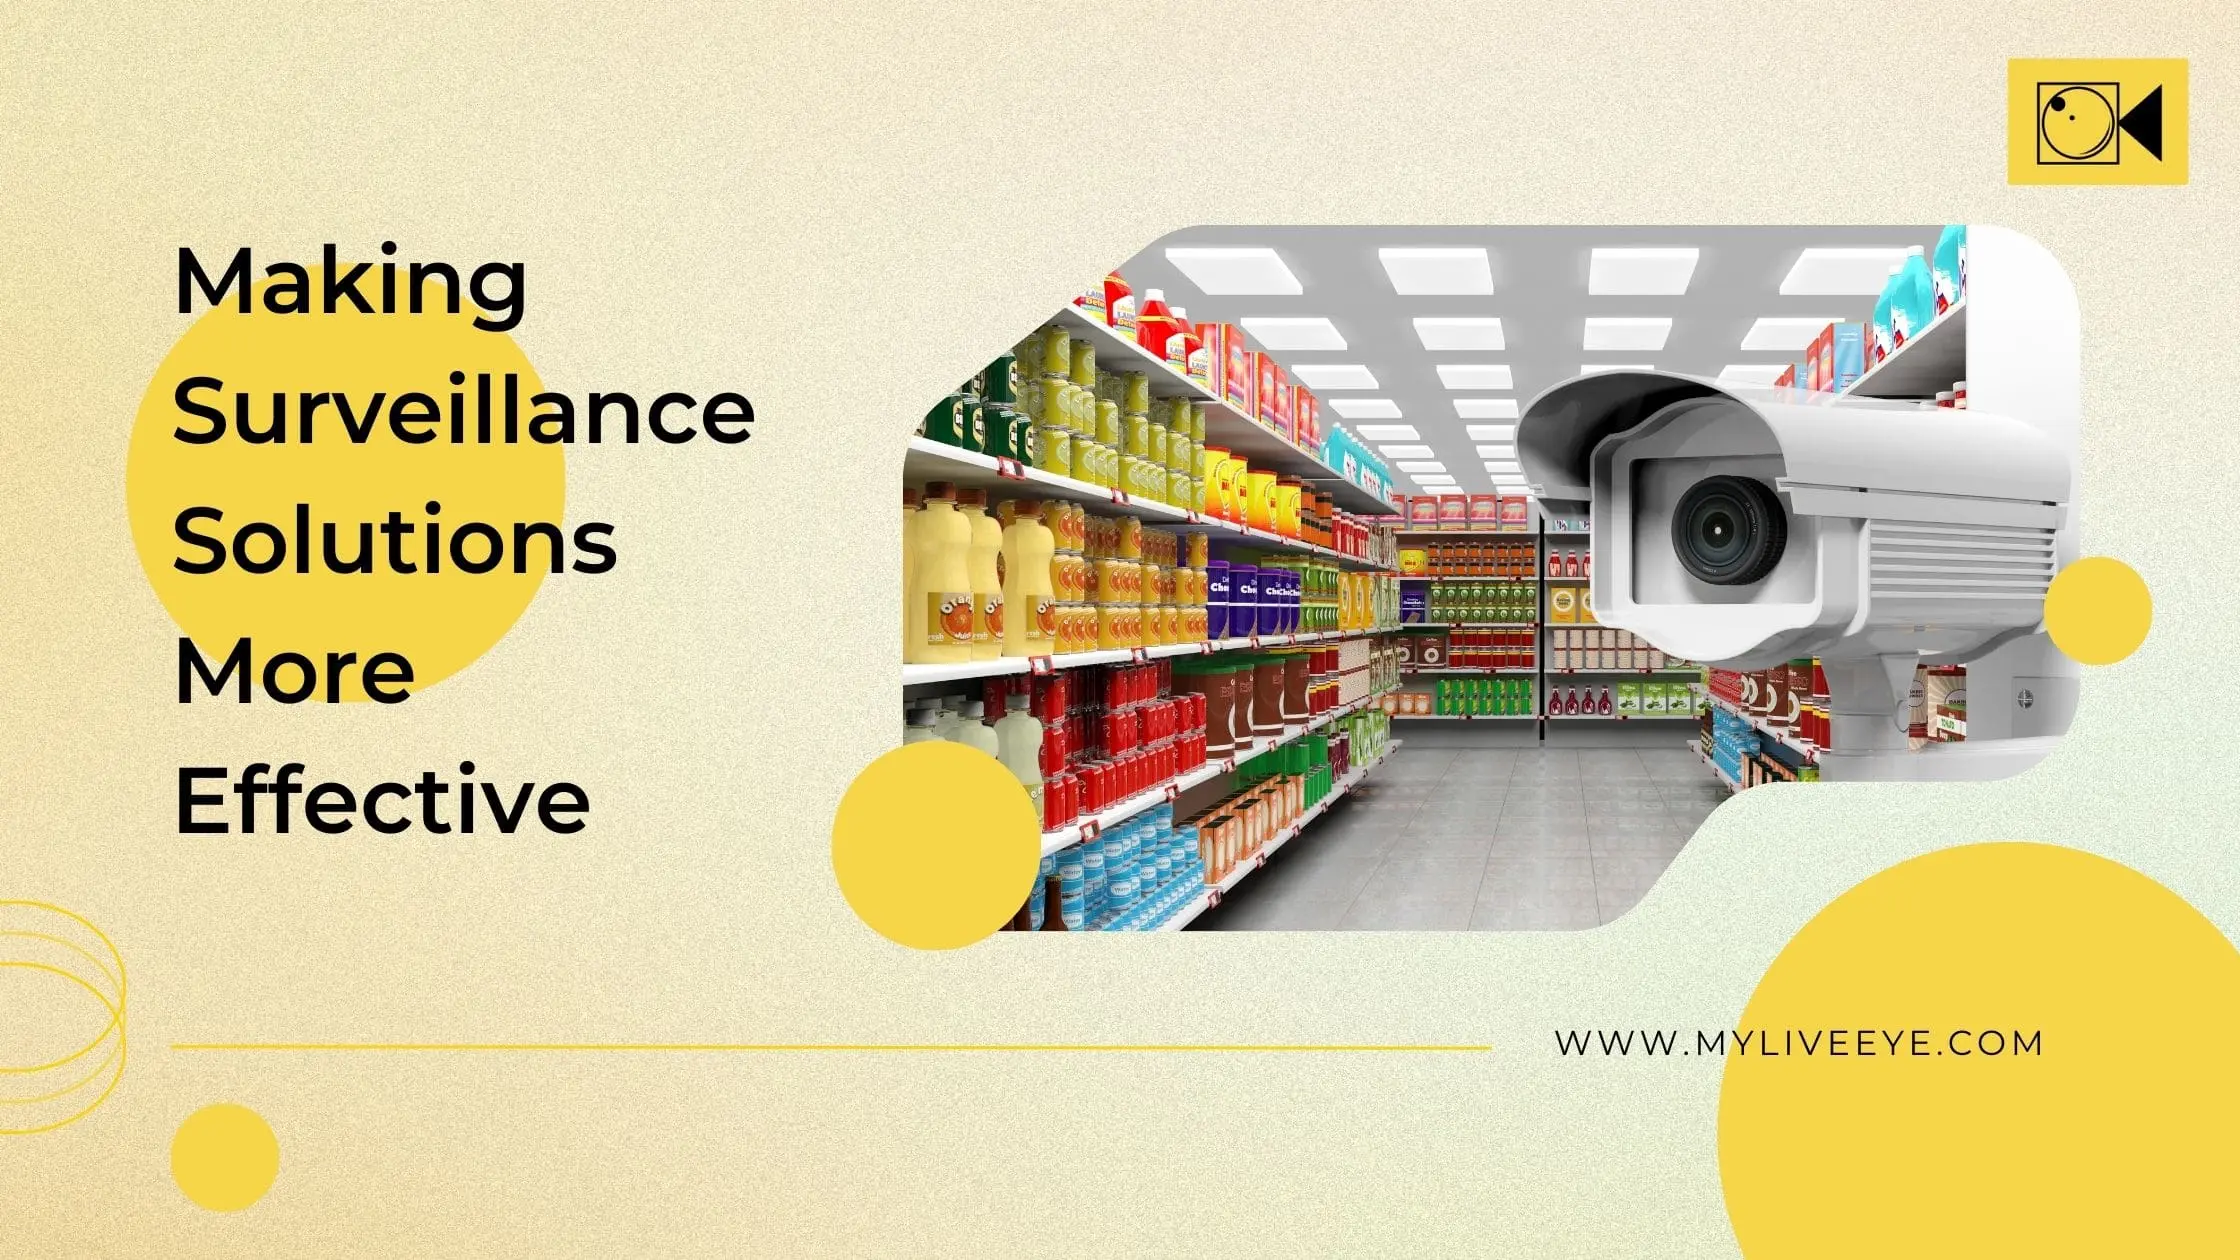 Making Surveillance Solutions More Effective